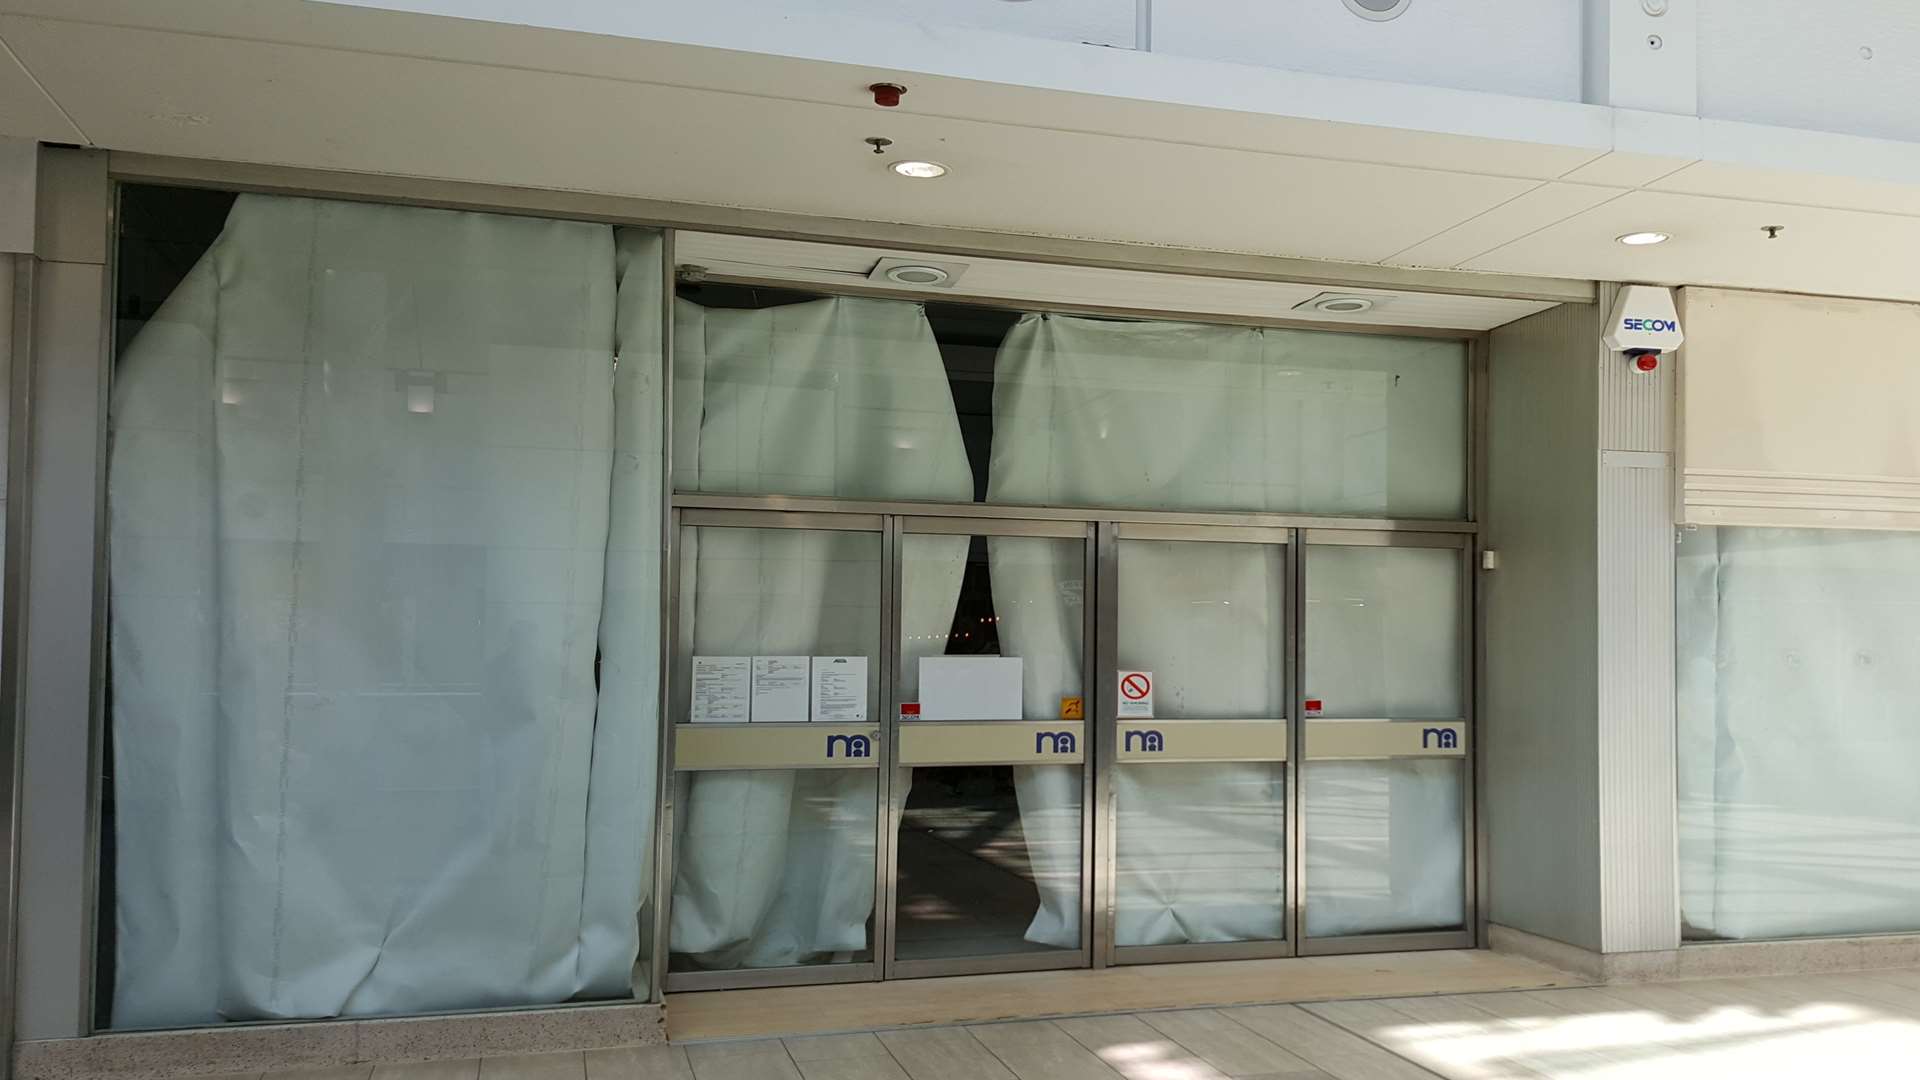 The former Mothercare store in County Square has been taken over